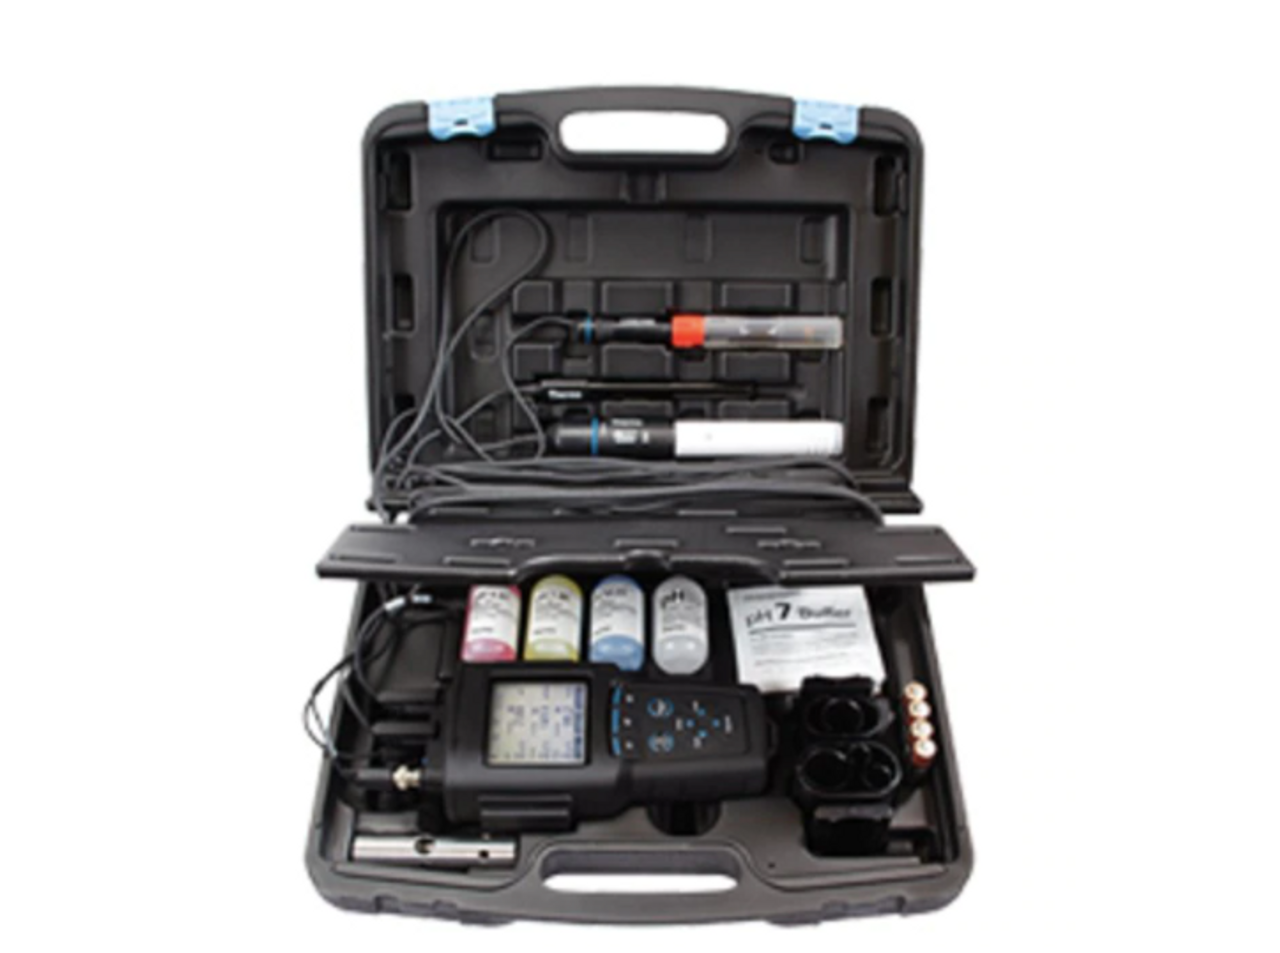 Orion Star A329 portable pH/ISE/conductivity meter kit